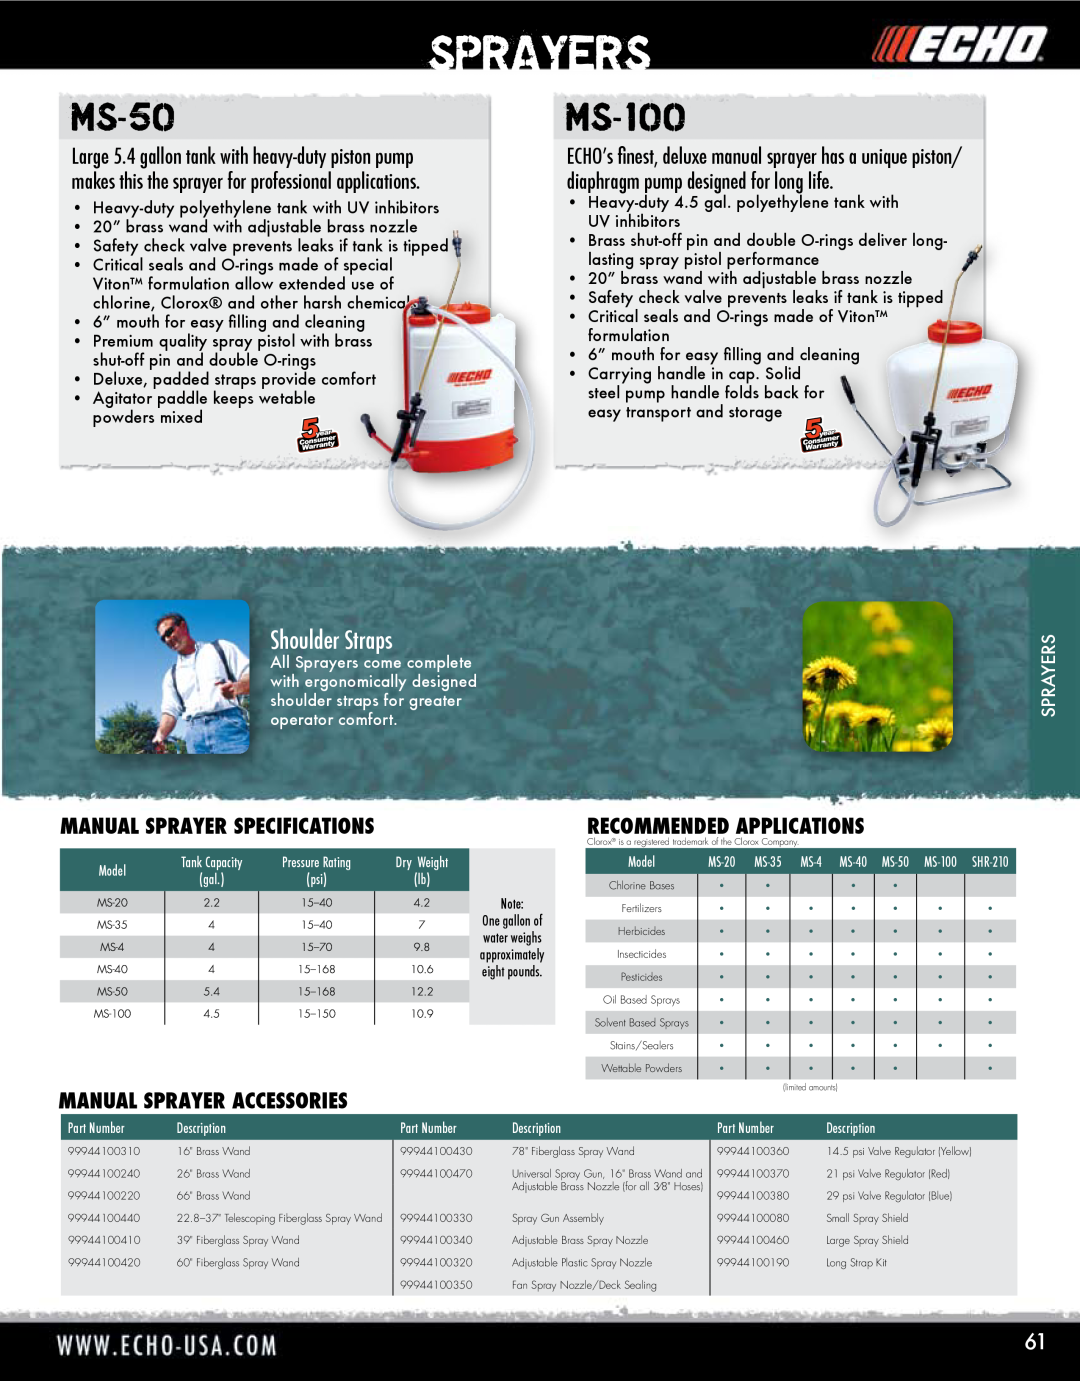 Echo HV-110XG manual MS-50, MS-100, Shoulder Straps, Manual Sprayer Specifications, Recommended Applications, Sprayers 